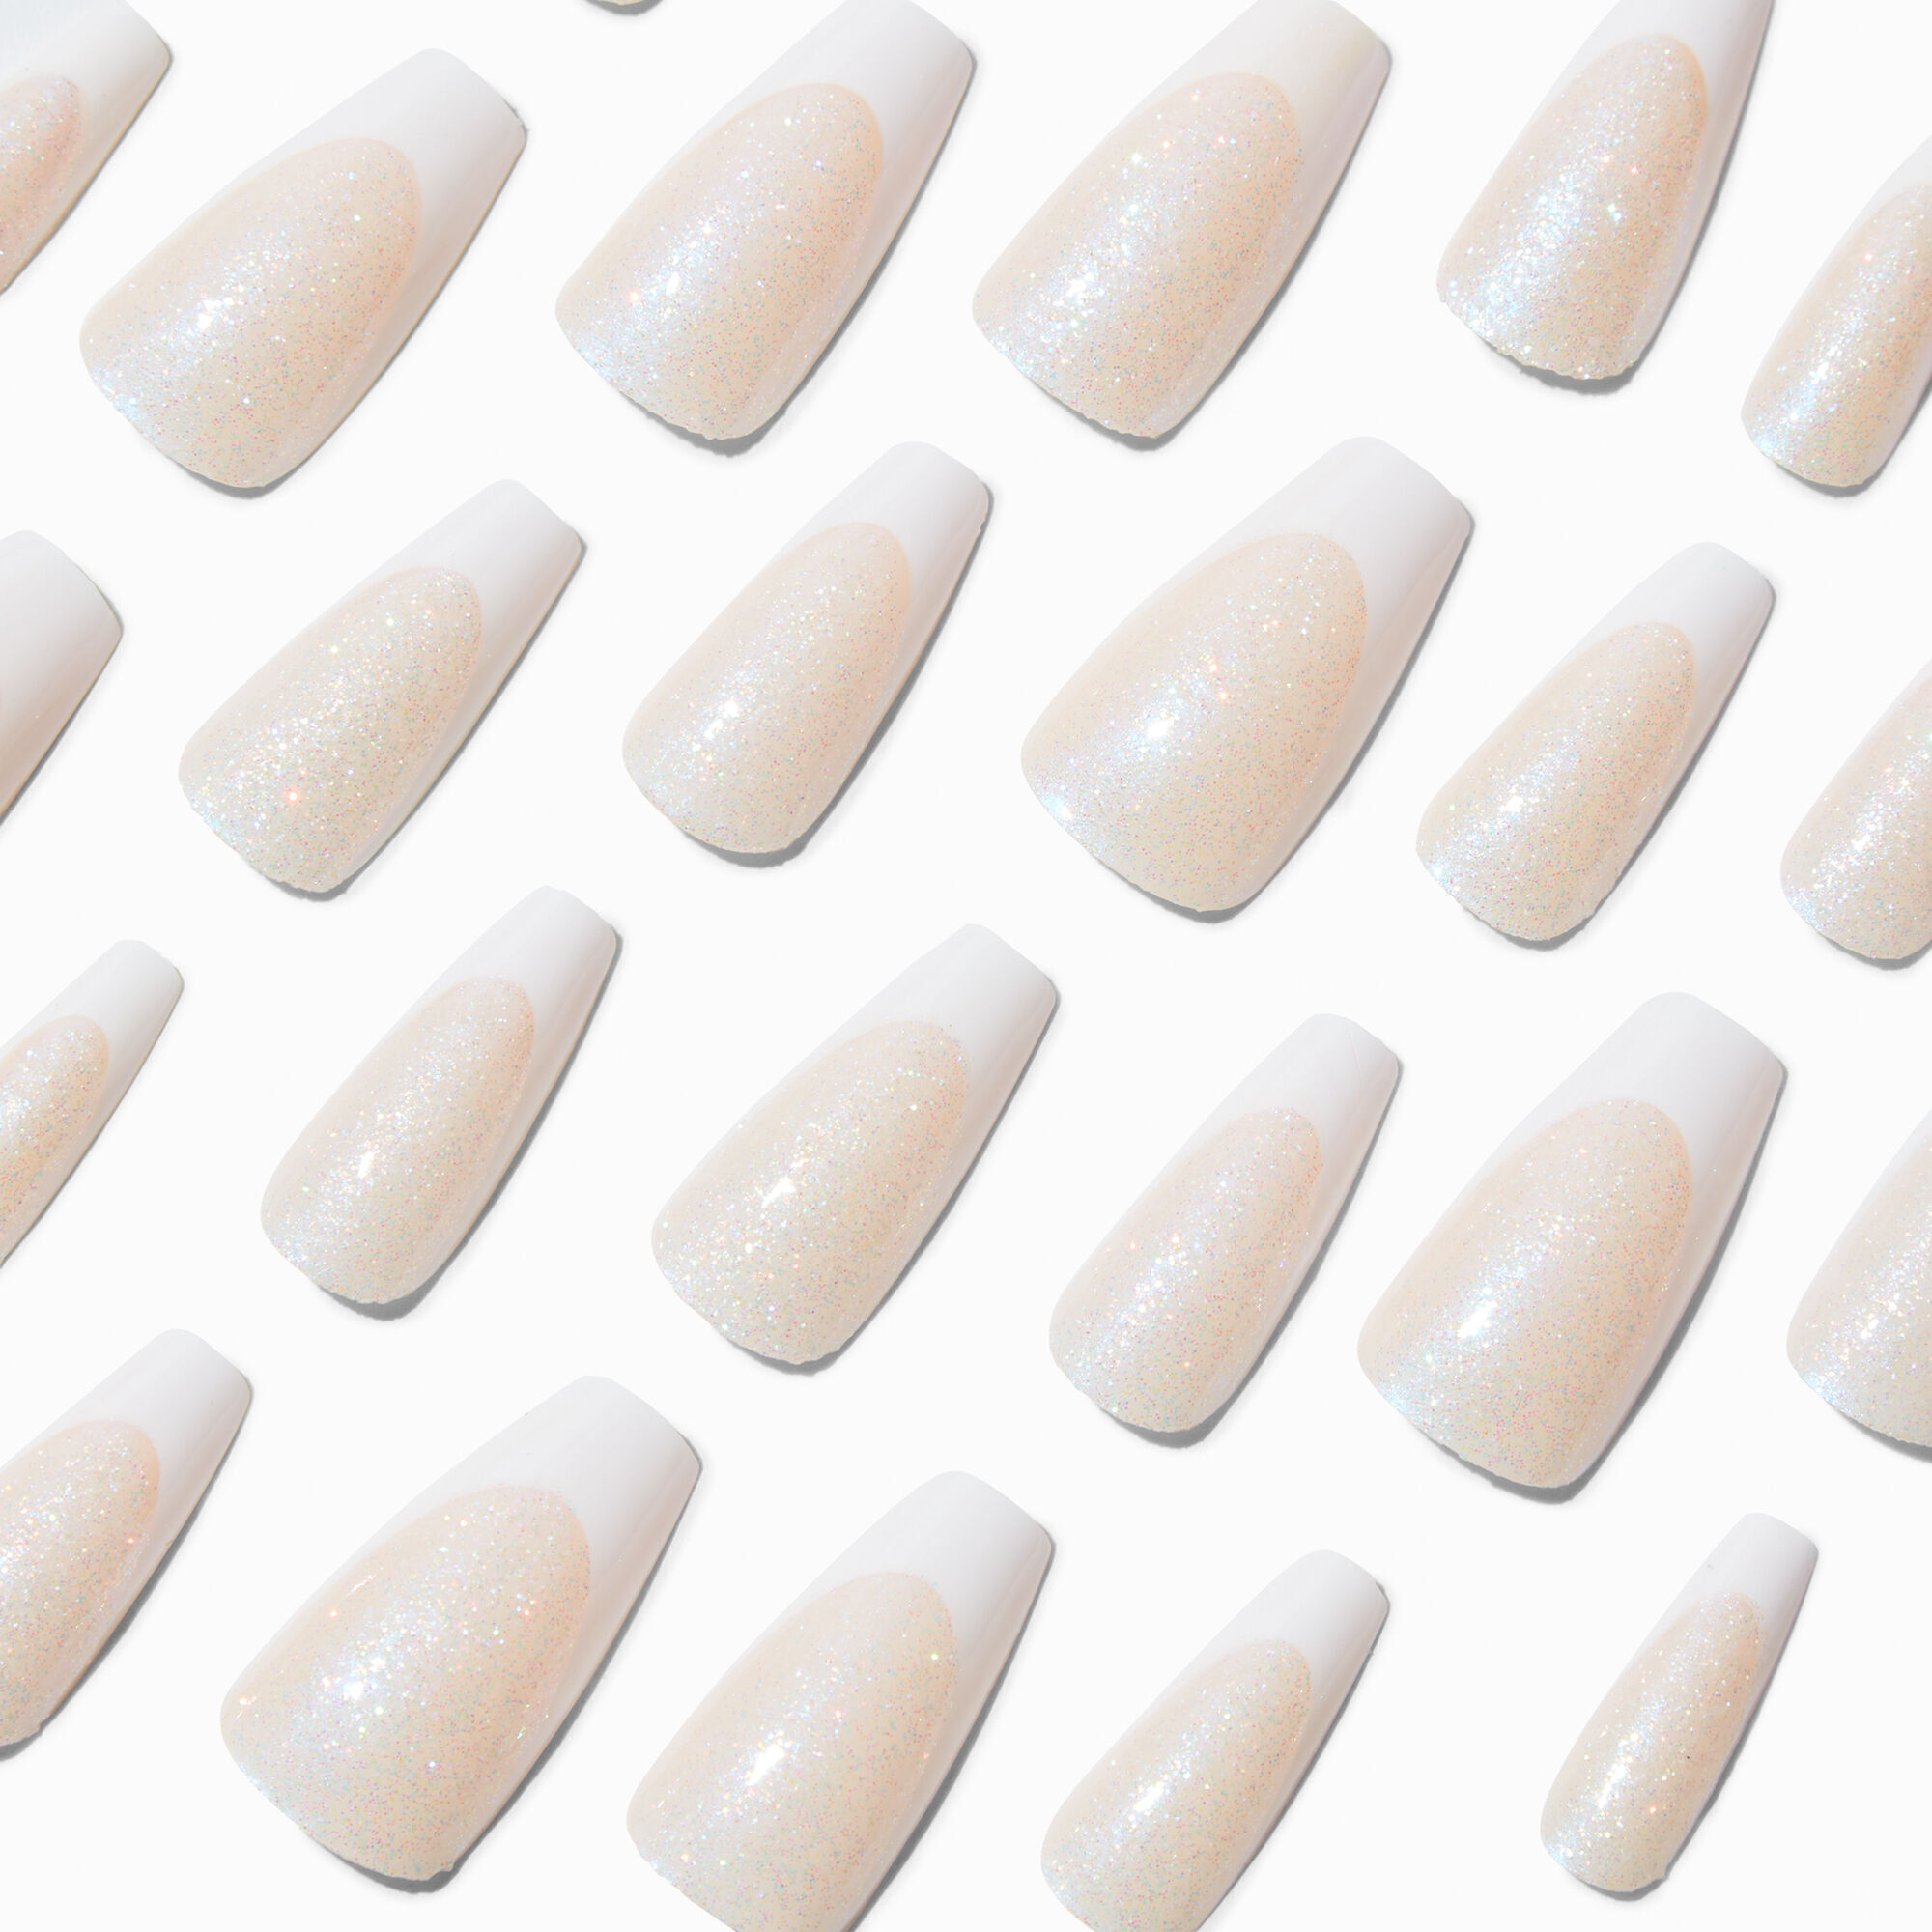 View Claires Glazed French Tip Squareletto Vegan Faux Nail Set 24 Pack White information